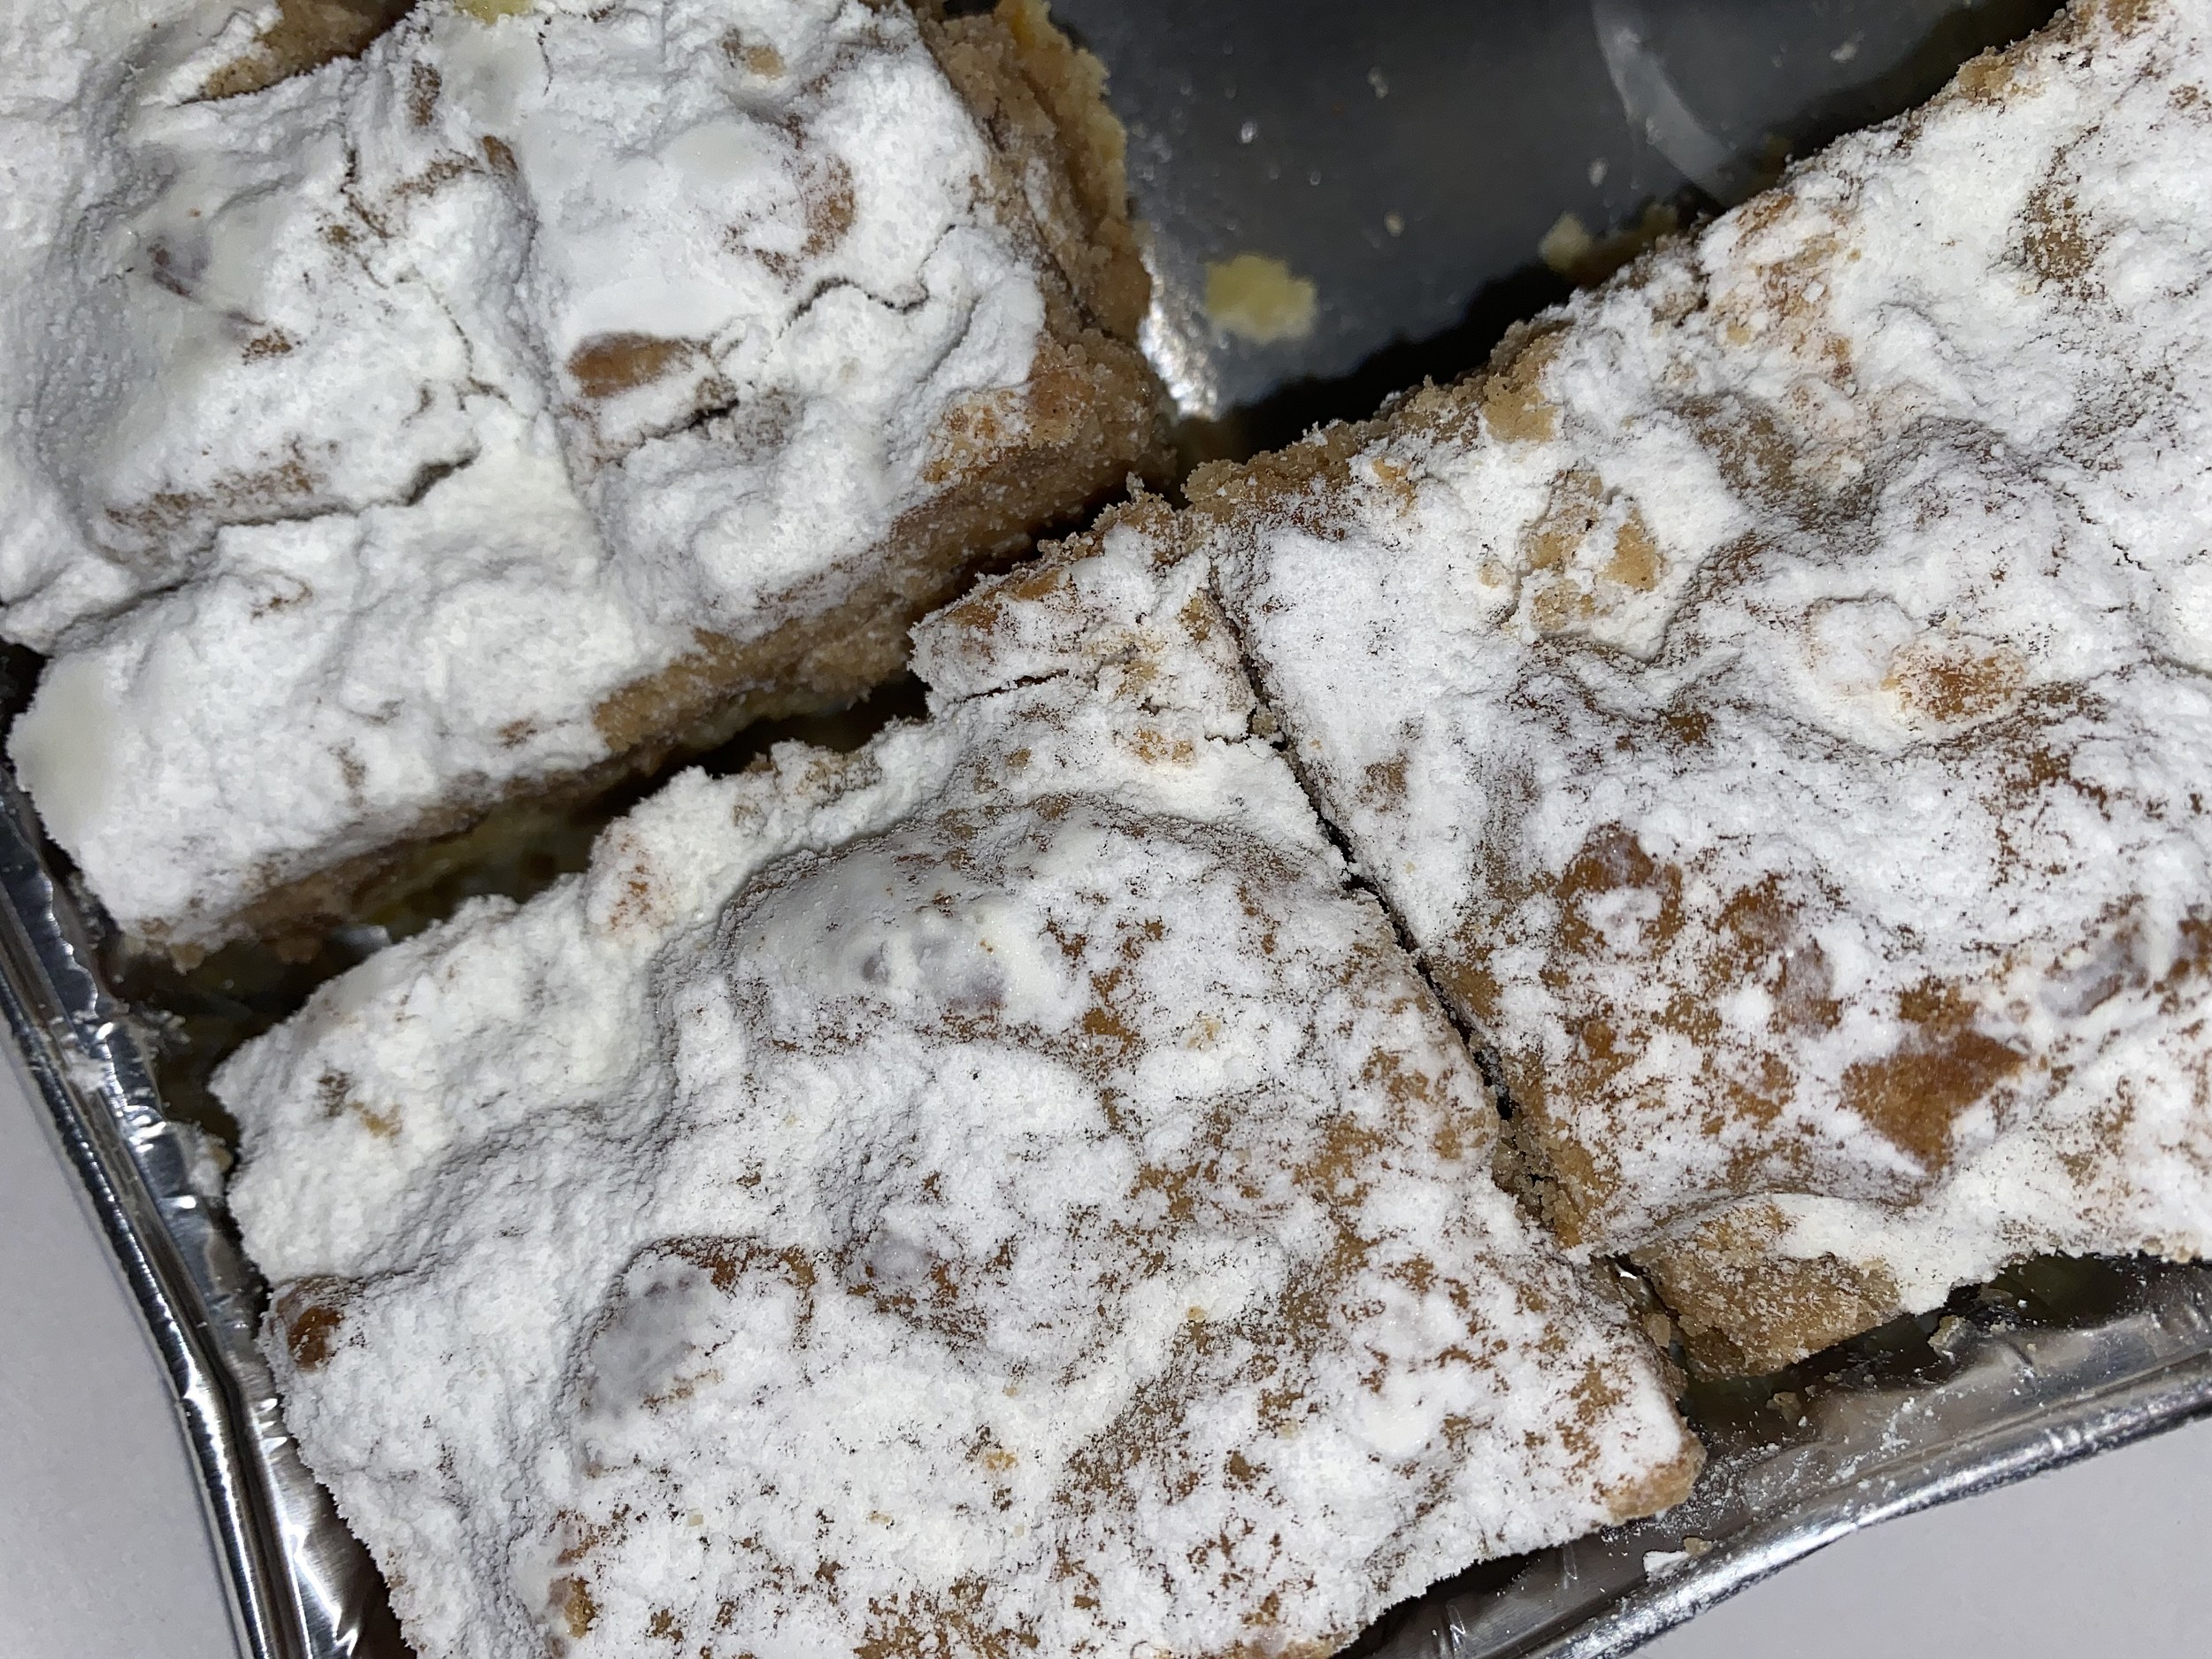 Dearborn Market In Holmdel, New Jersey Has The Best Crumb Cake